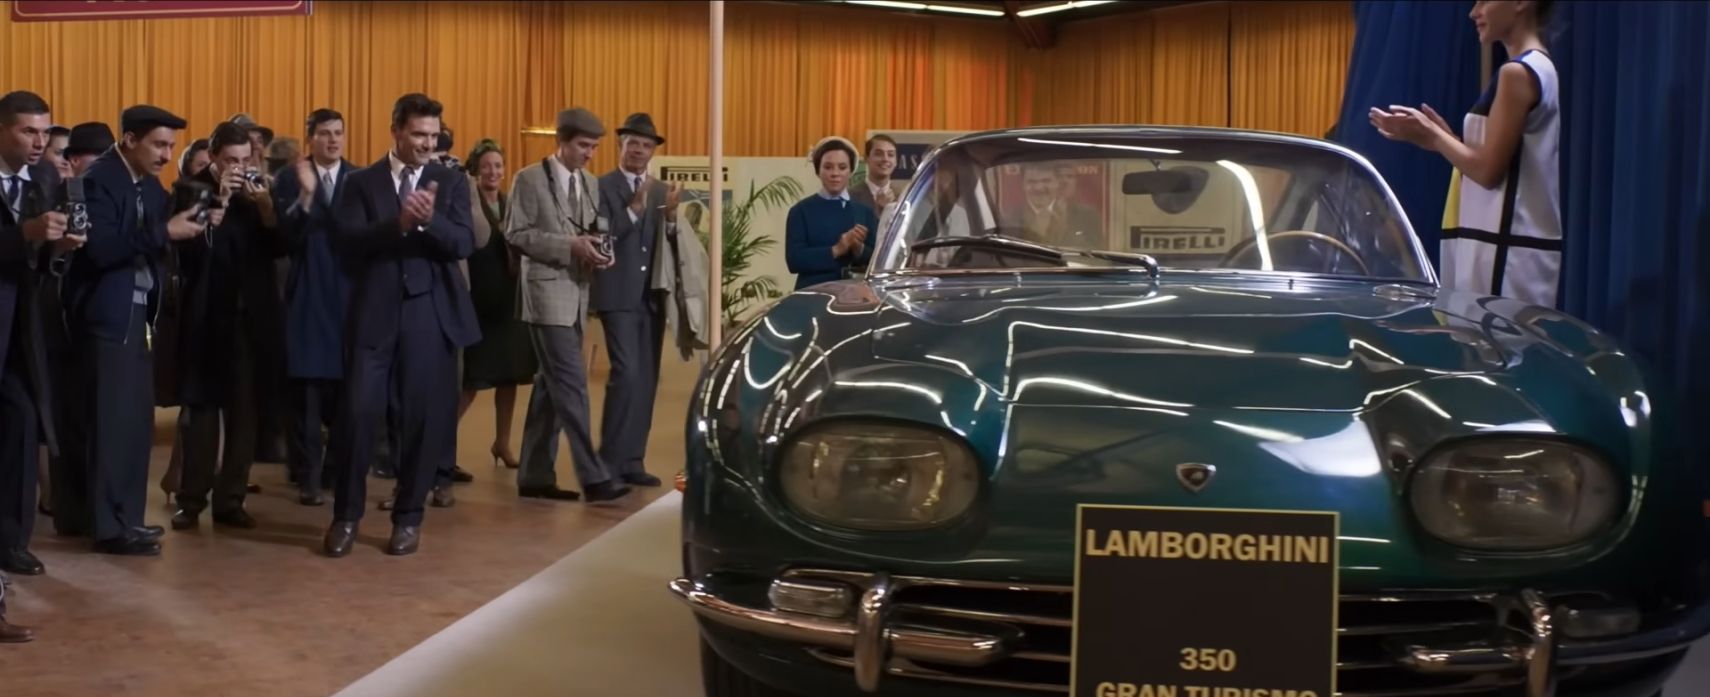 Lamborghini: The Man Behind The Legend Promises To Be The Next Great Car  Movie